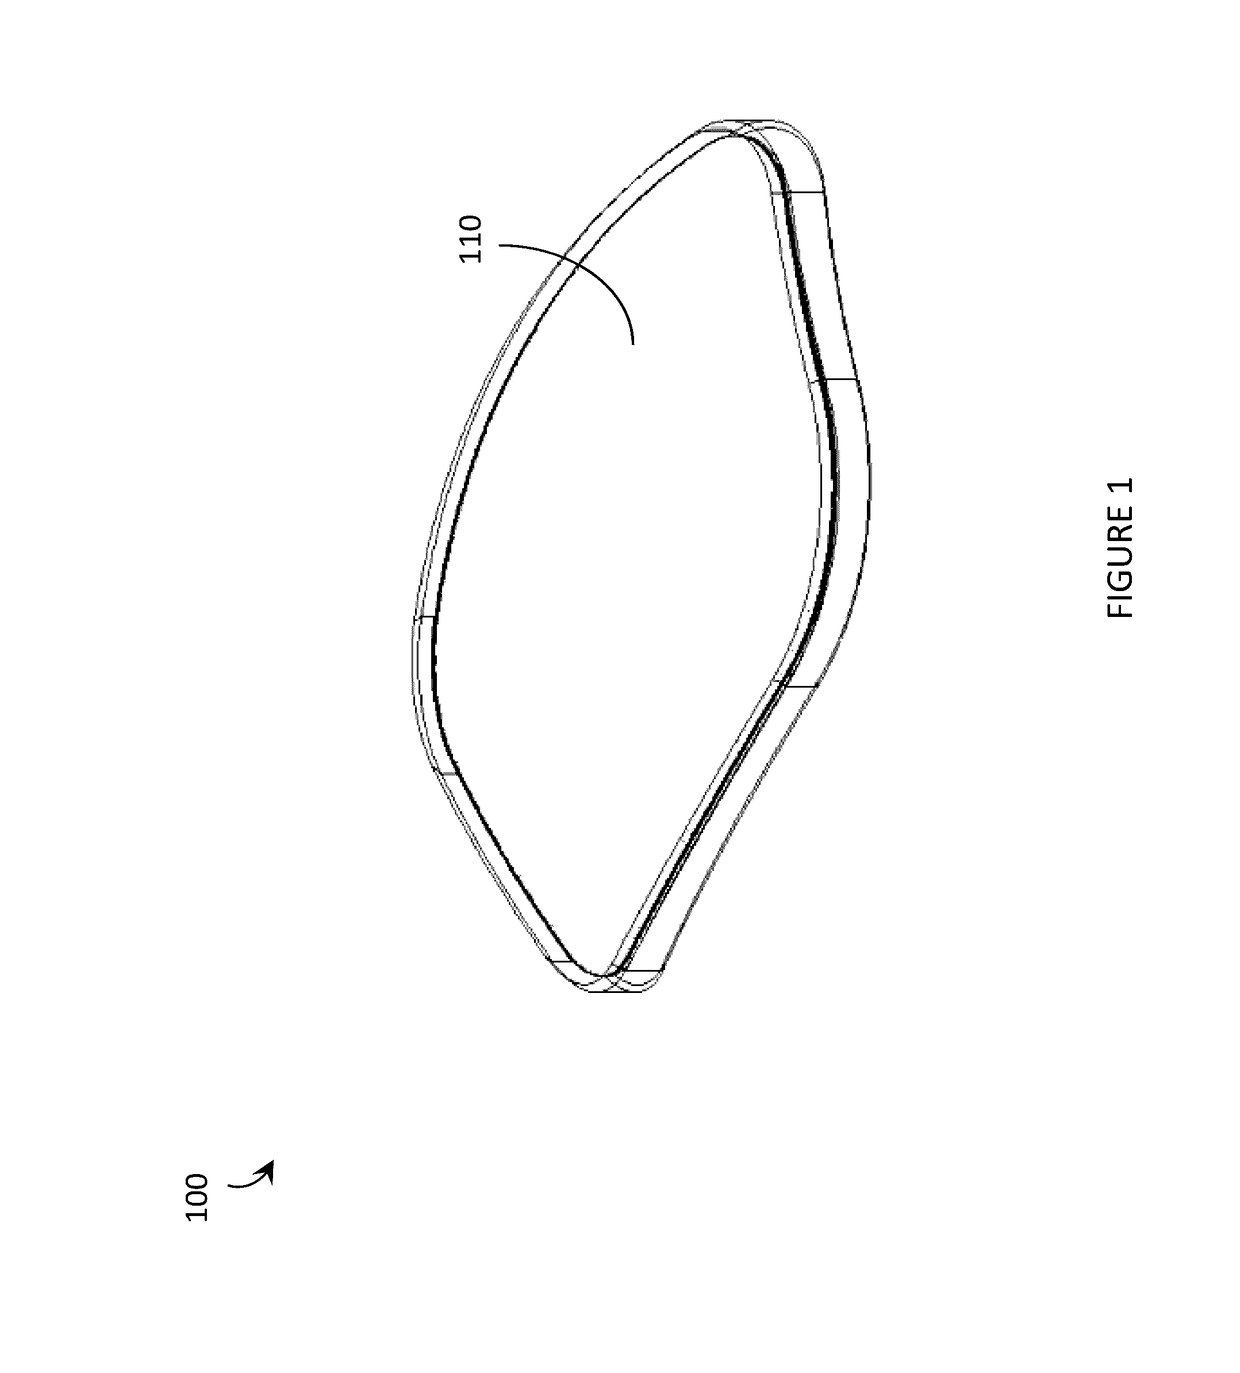 Systems, articles, and methods for integrating holographic optical elements with eyeglass lenses